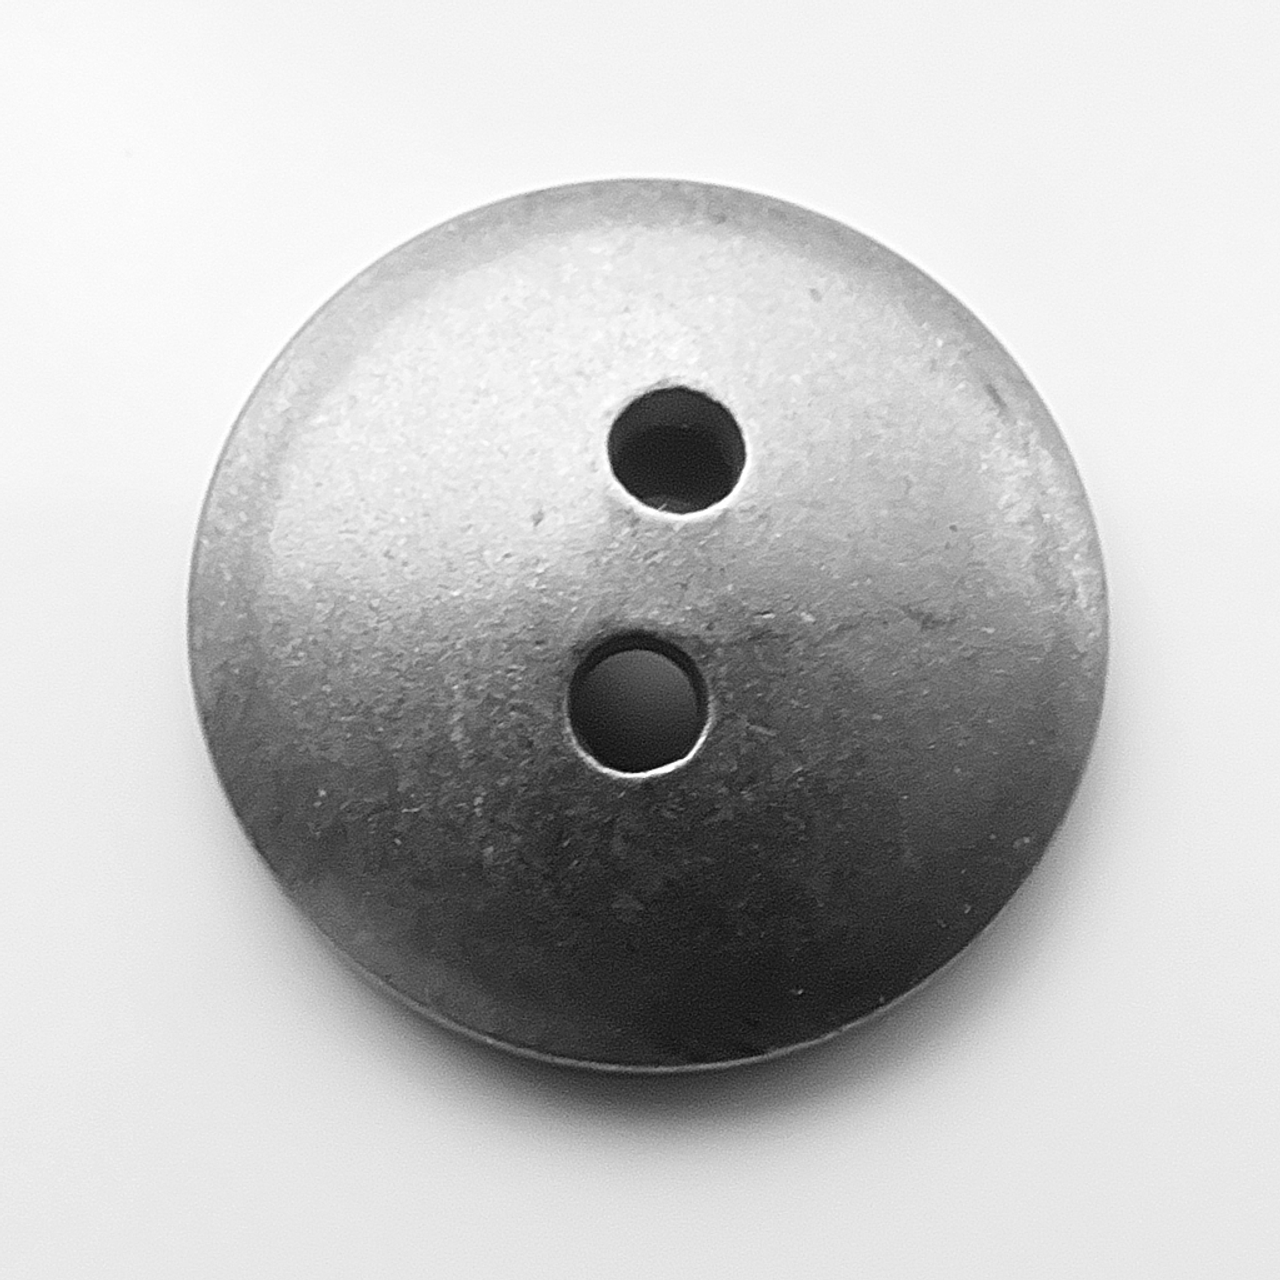 Aluminium Button, 15mm domed- Pack of 10 (251-AL) - SALE PRICE: 50% OFF